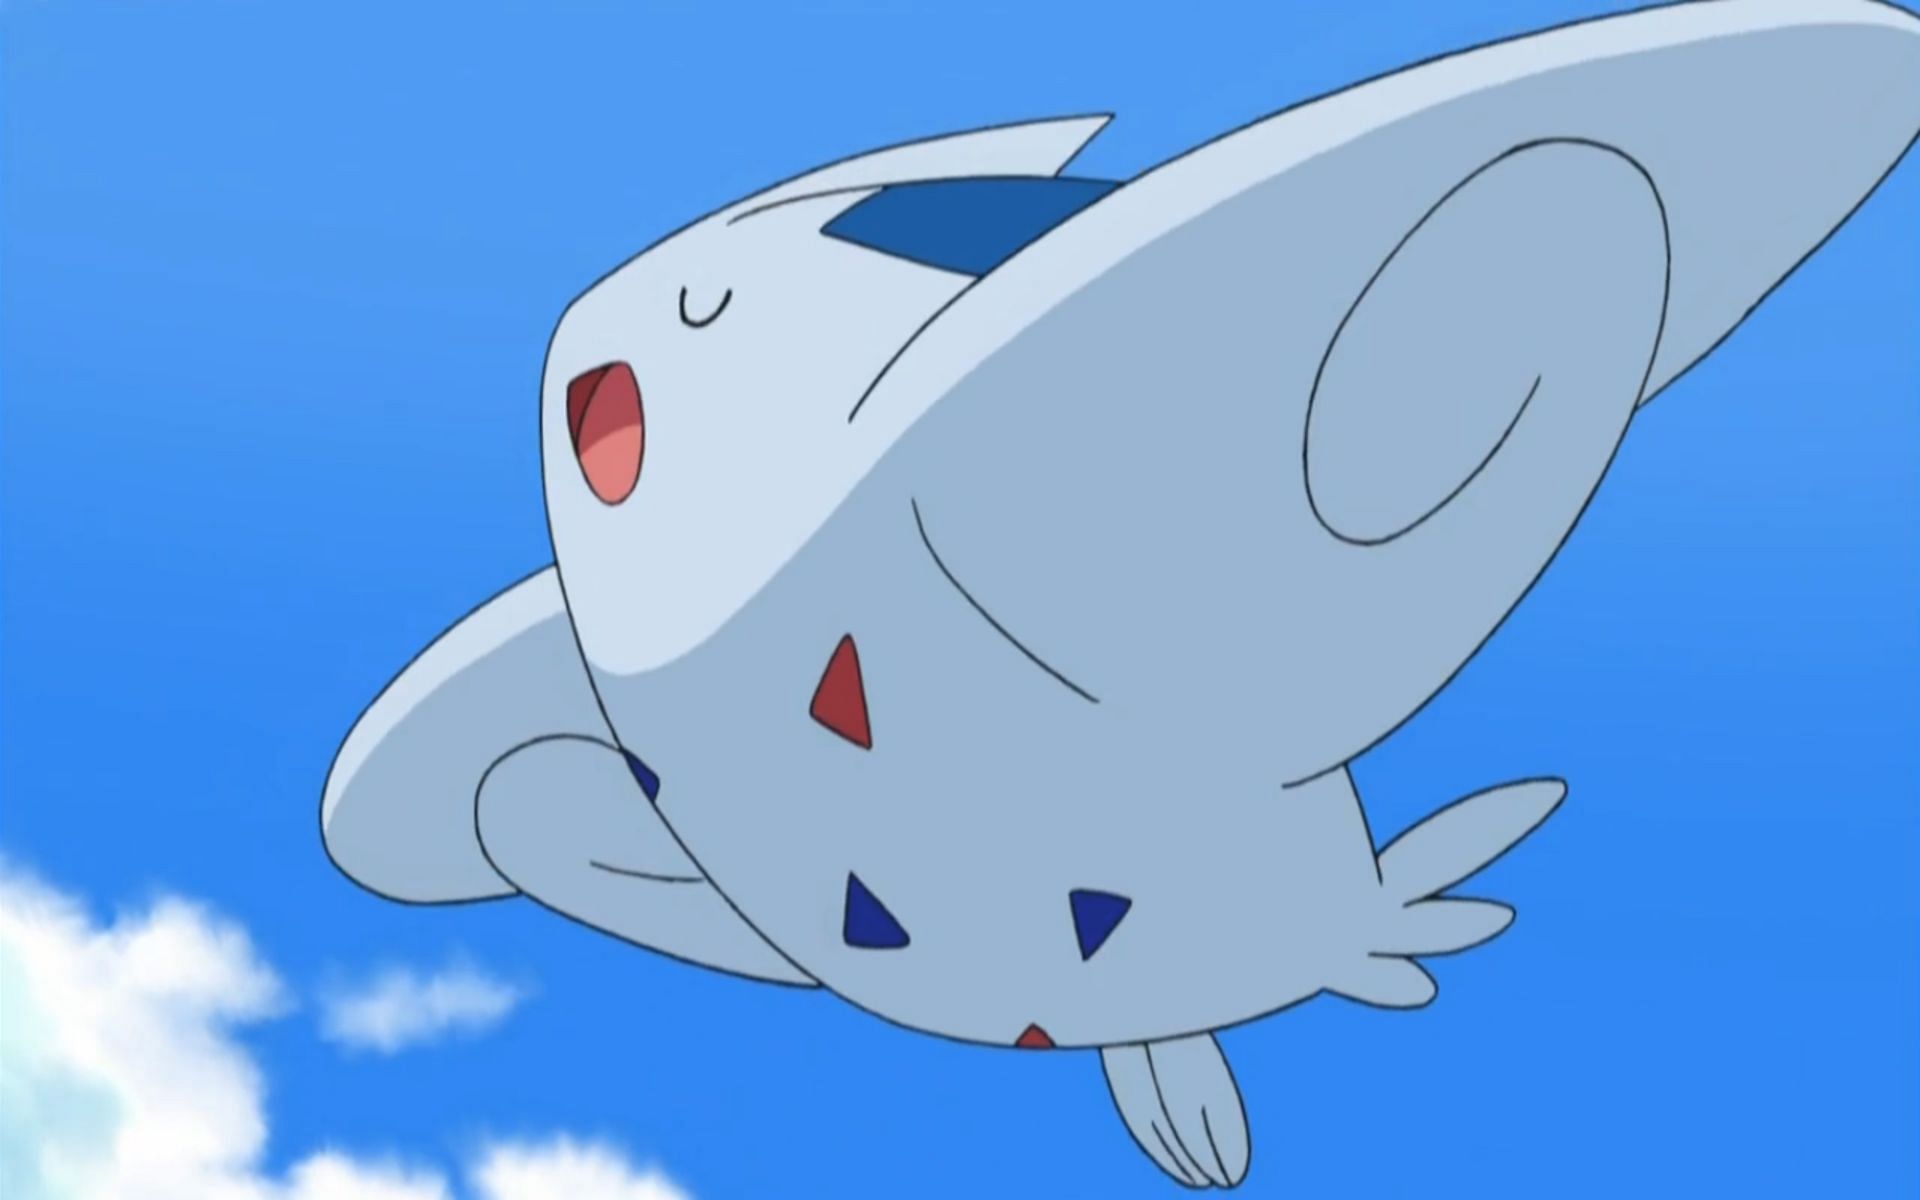 Togekiss evolves from Togetic with a Shiny Stone (Image via The Pokemon Company)